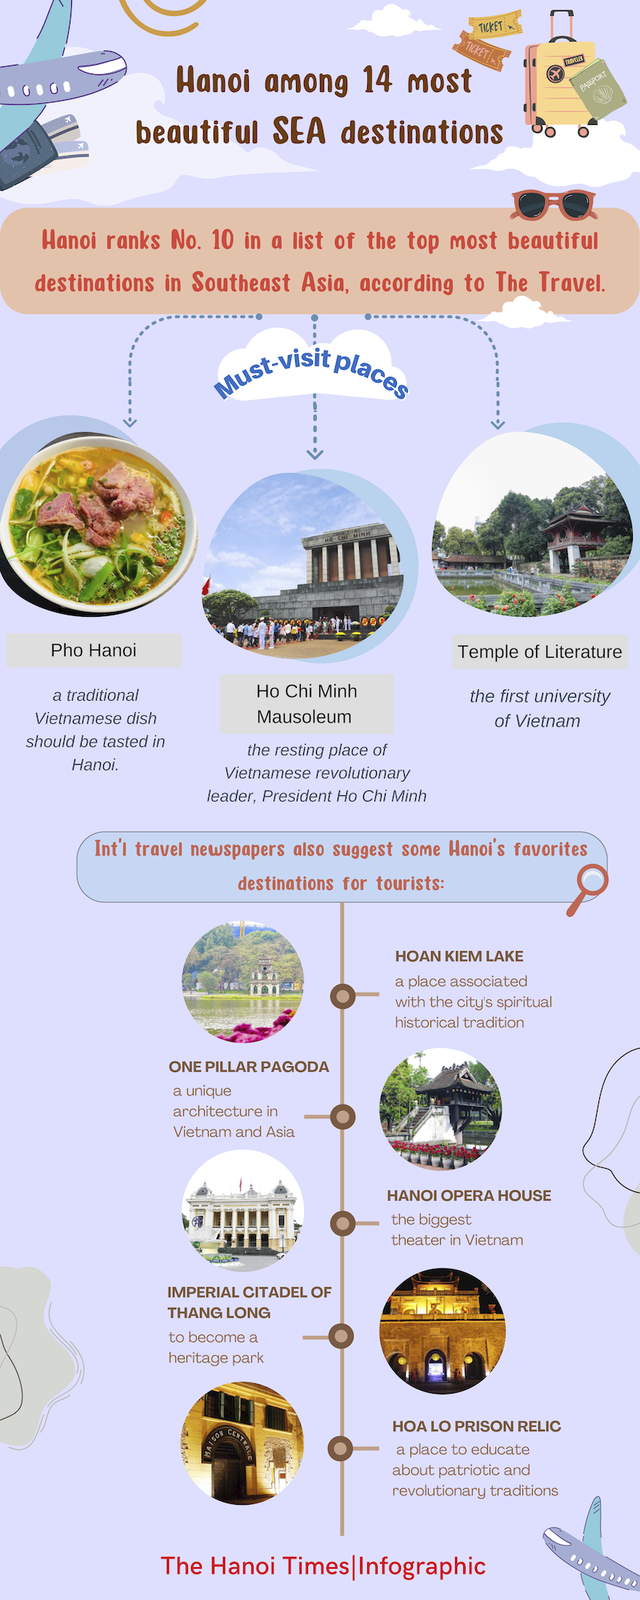 [Infographic] Hanoi among top 14 most beautiful destinations in SEA - Ảnh 1.